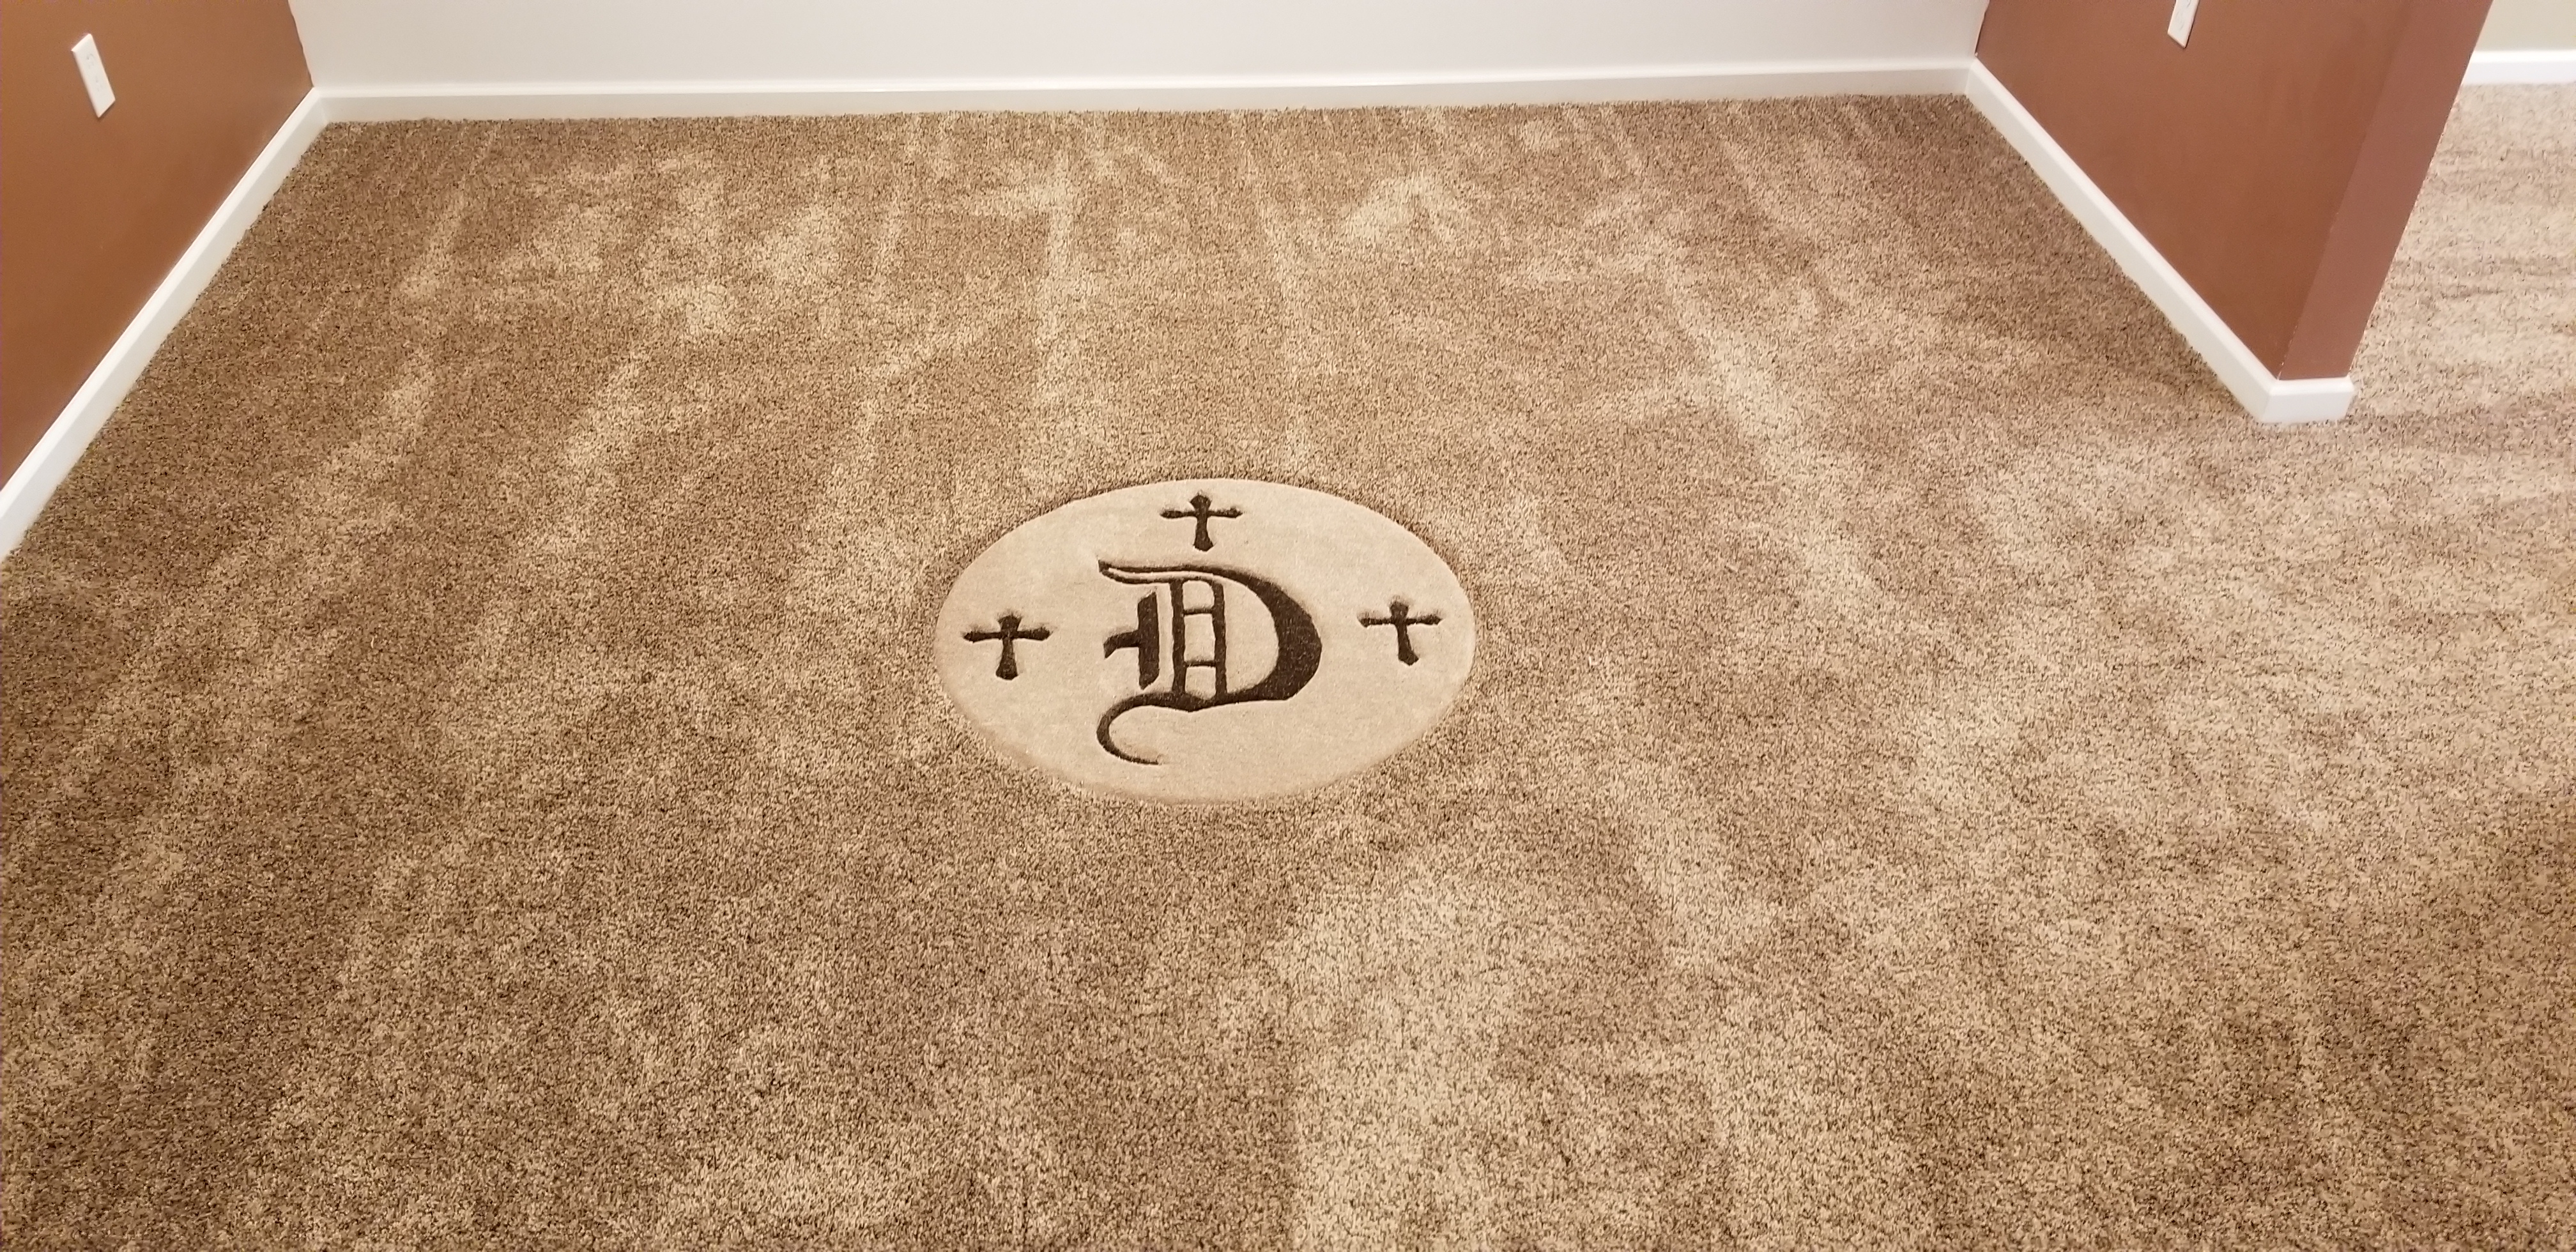 A carpet with the letter d on it